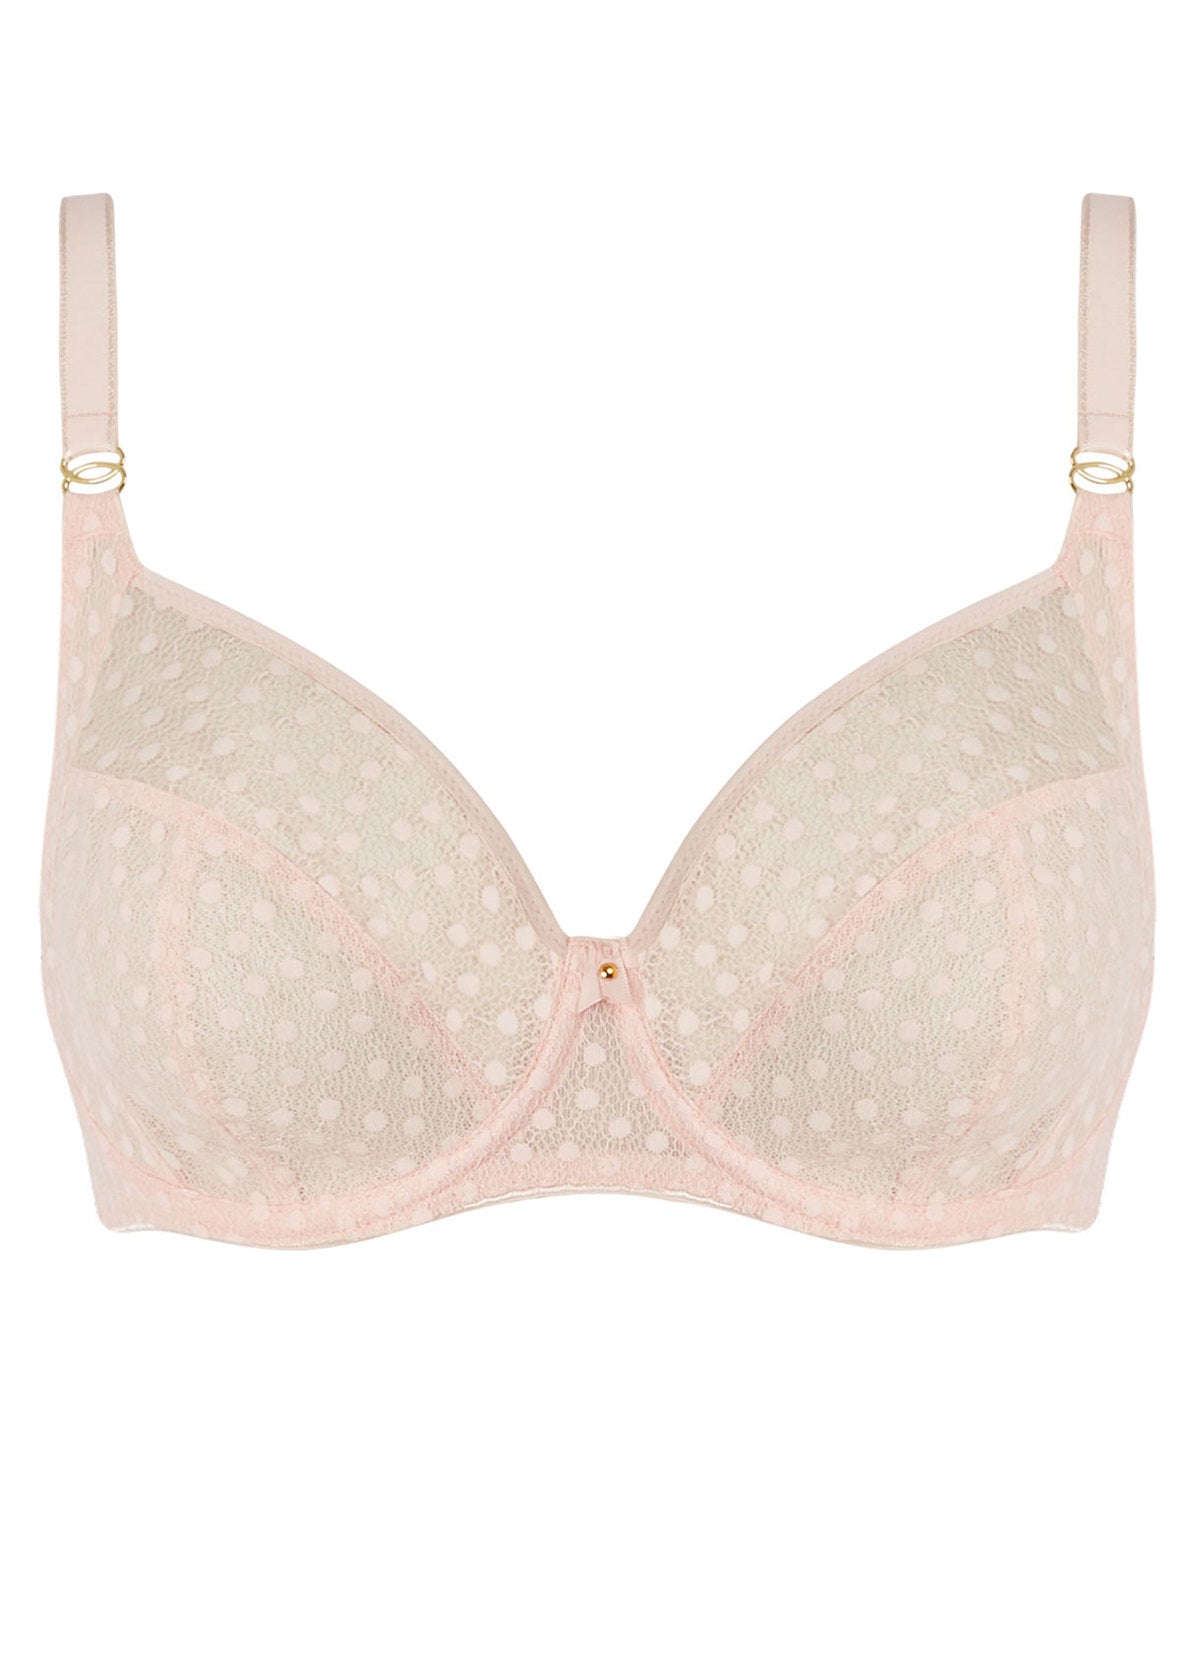 Starlight Side Support Balcony Bra (GG - K Cup) - Rosewater